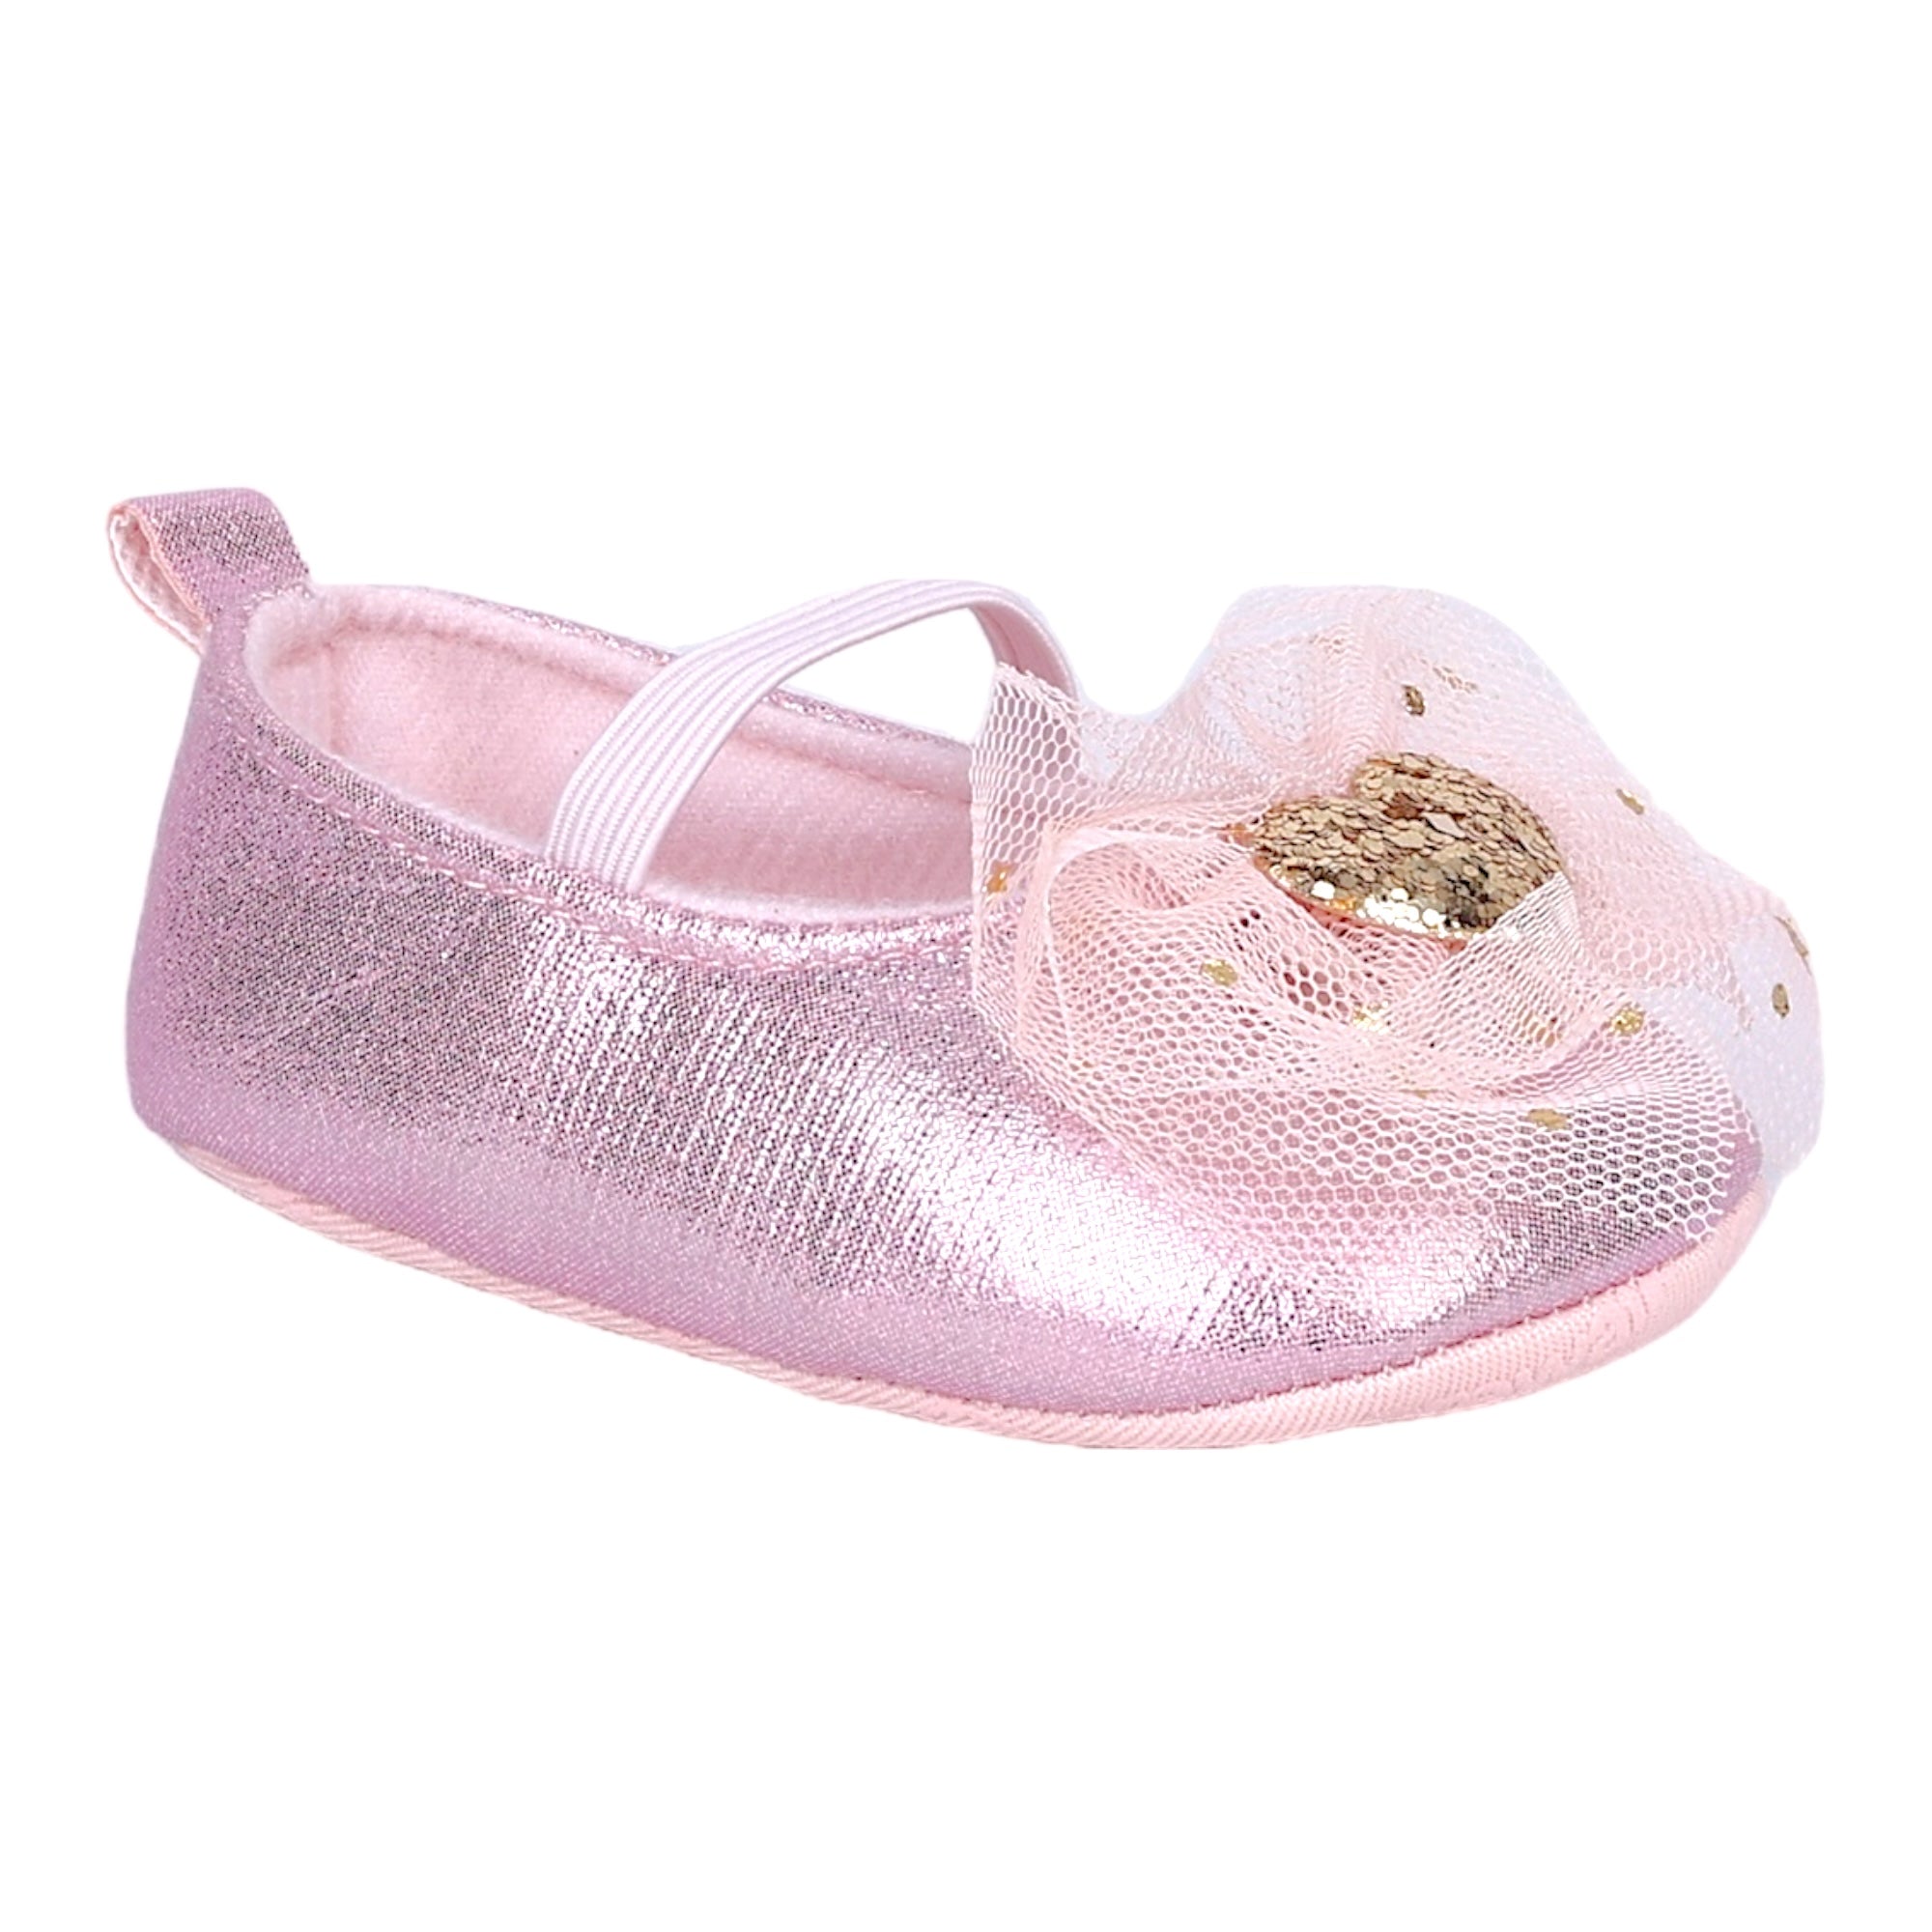 Baby Moo Embellished Bow Glittery Heart Anti-Skid Ballerina Booties - Pink